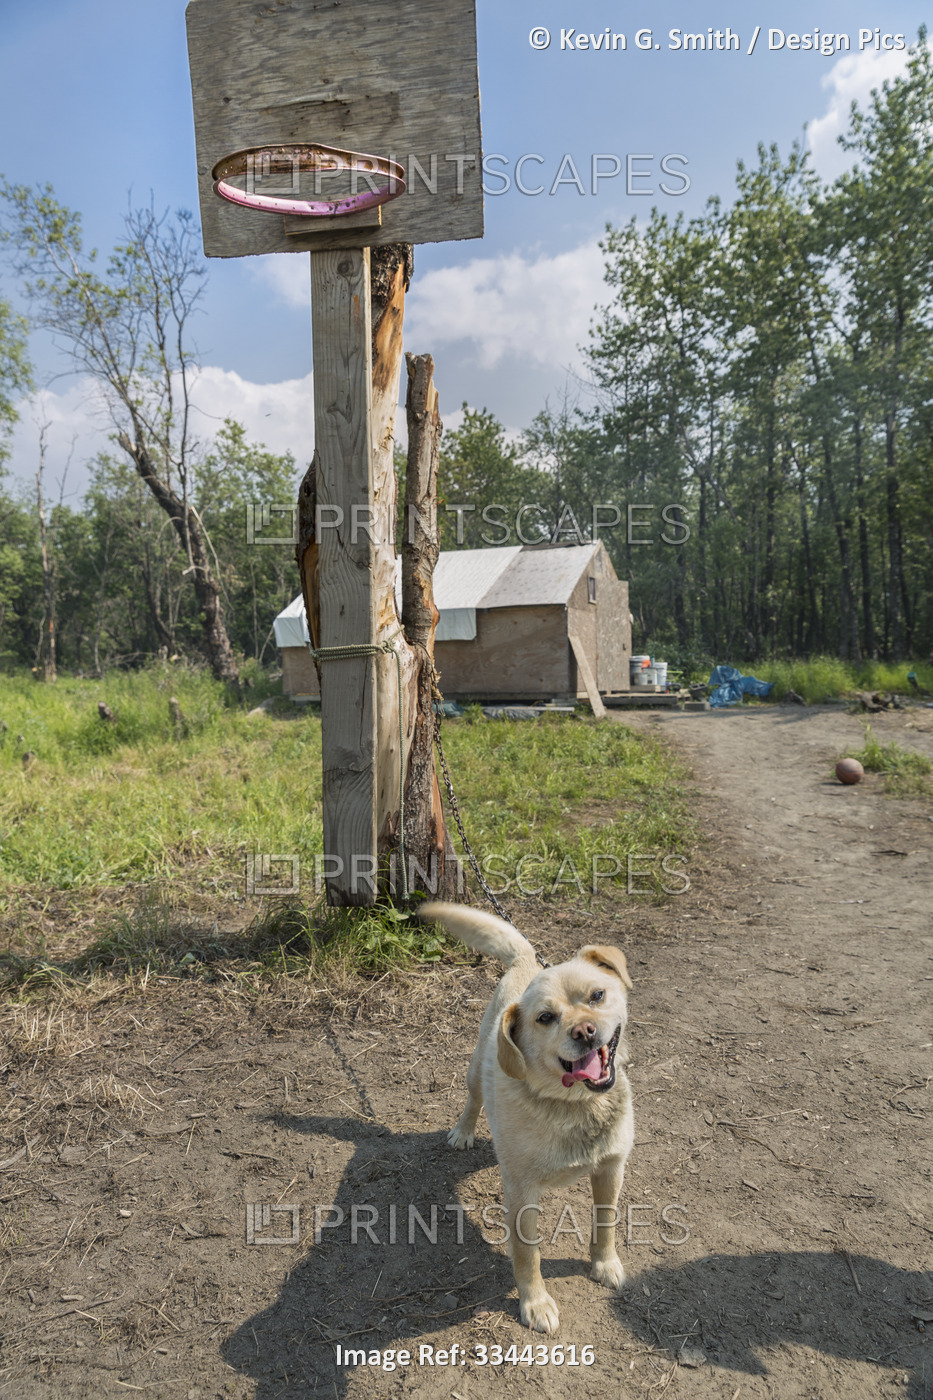 A friendly dog tied up to a basketball hoop comes to greet the photographer, ...